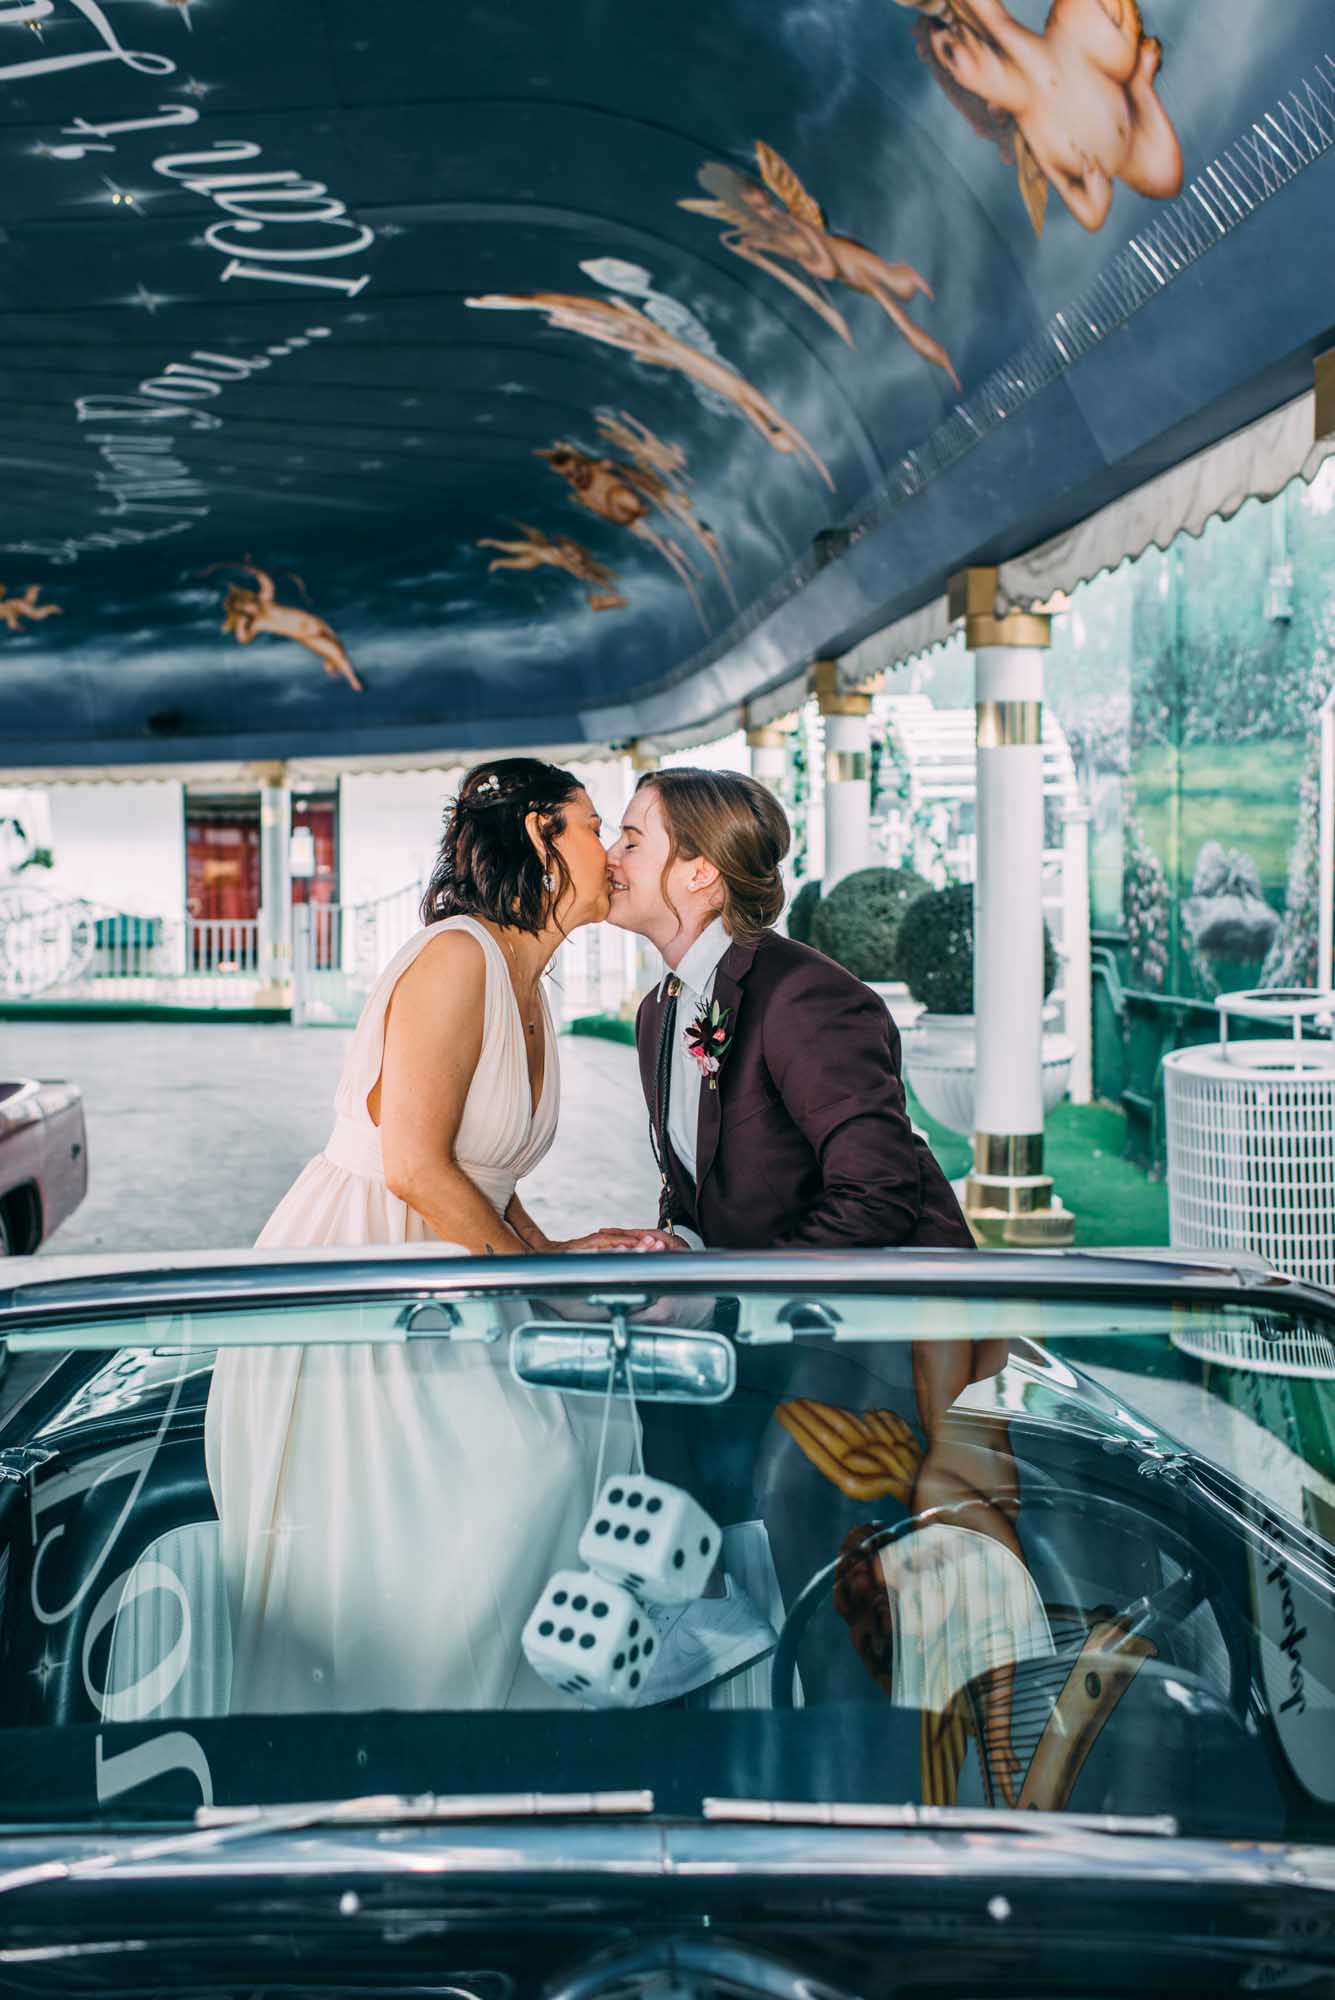 Las Vegas drive-thru elopement in chic vintage car | Ashley Marie Myers | Featured on Equally Wed, the leading LGBTQ+ wedding magazine